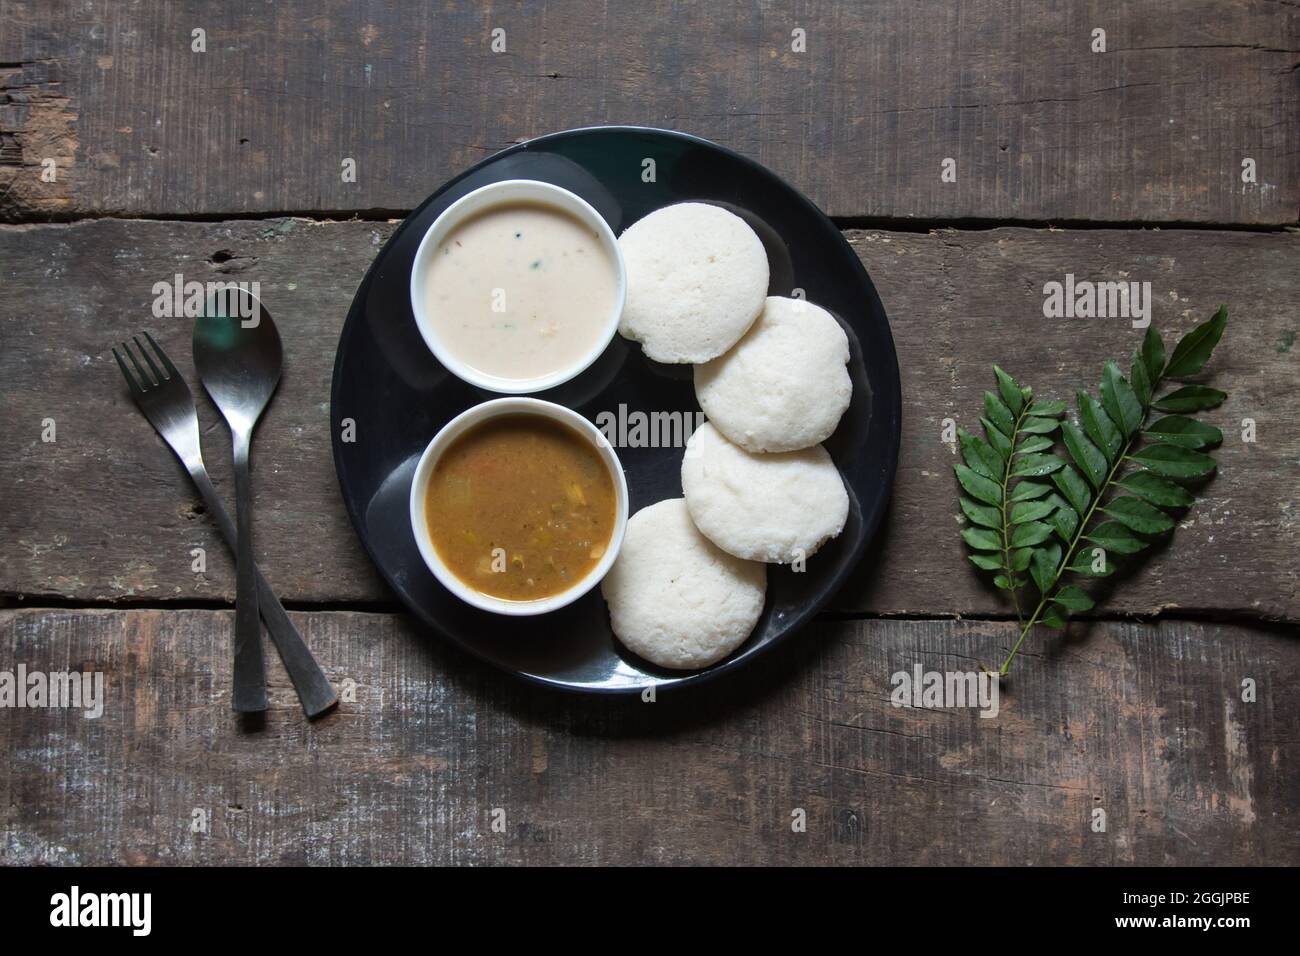 South Indian snacks idli sambar or idly sambhar prepared by steaming fermented rice and served with coconut dip and vegetable soup. Stock Photo